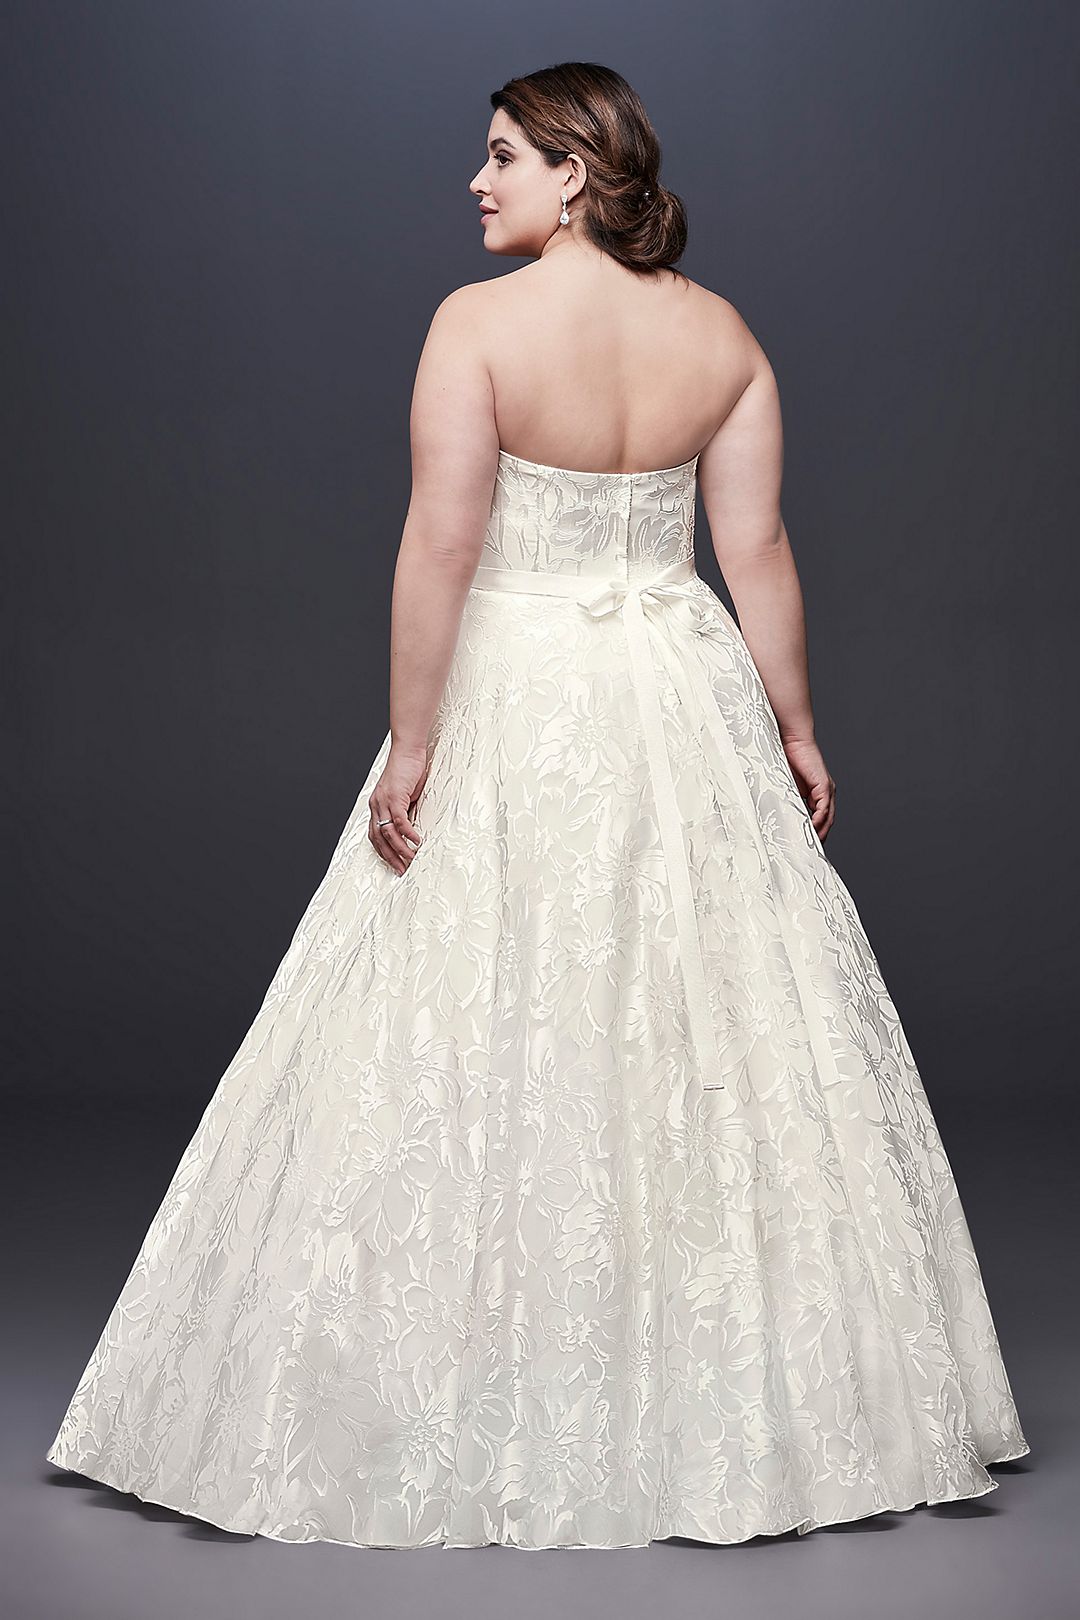 As-Is Printed A-line Plus Size Wedding Dress Image 4